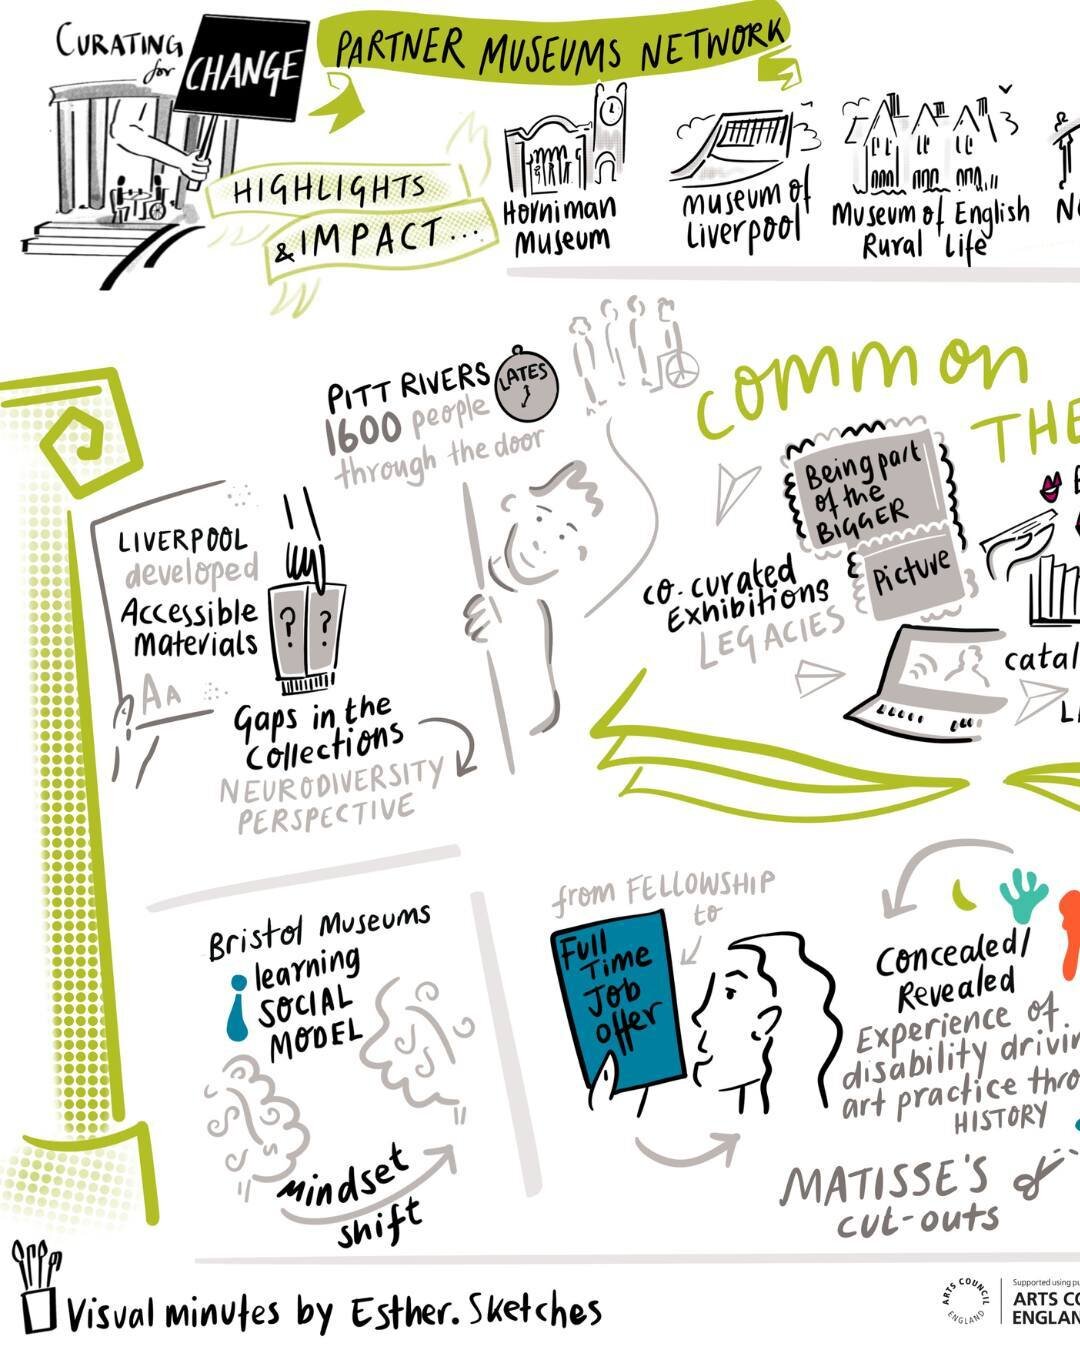 I recently had the pleasure of live illustrating the Curating for Change Museum Partners Network online meeting ✍🏻

It was a fantastic session of evaluation and reflection and I enjoyed the opportunity to create two sets of visual minutes as a lasti